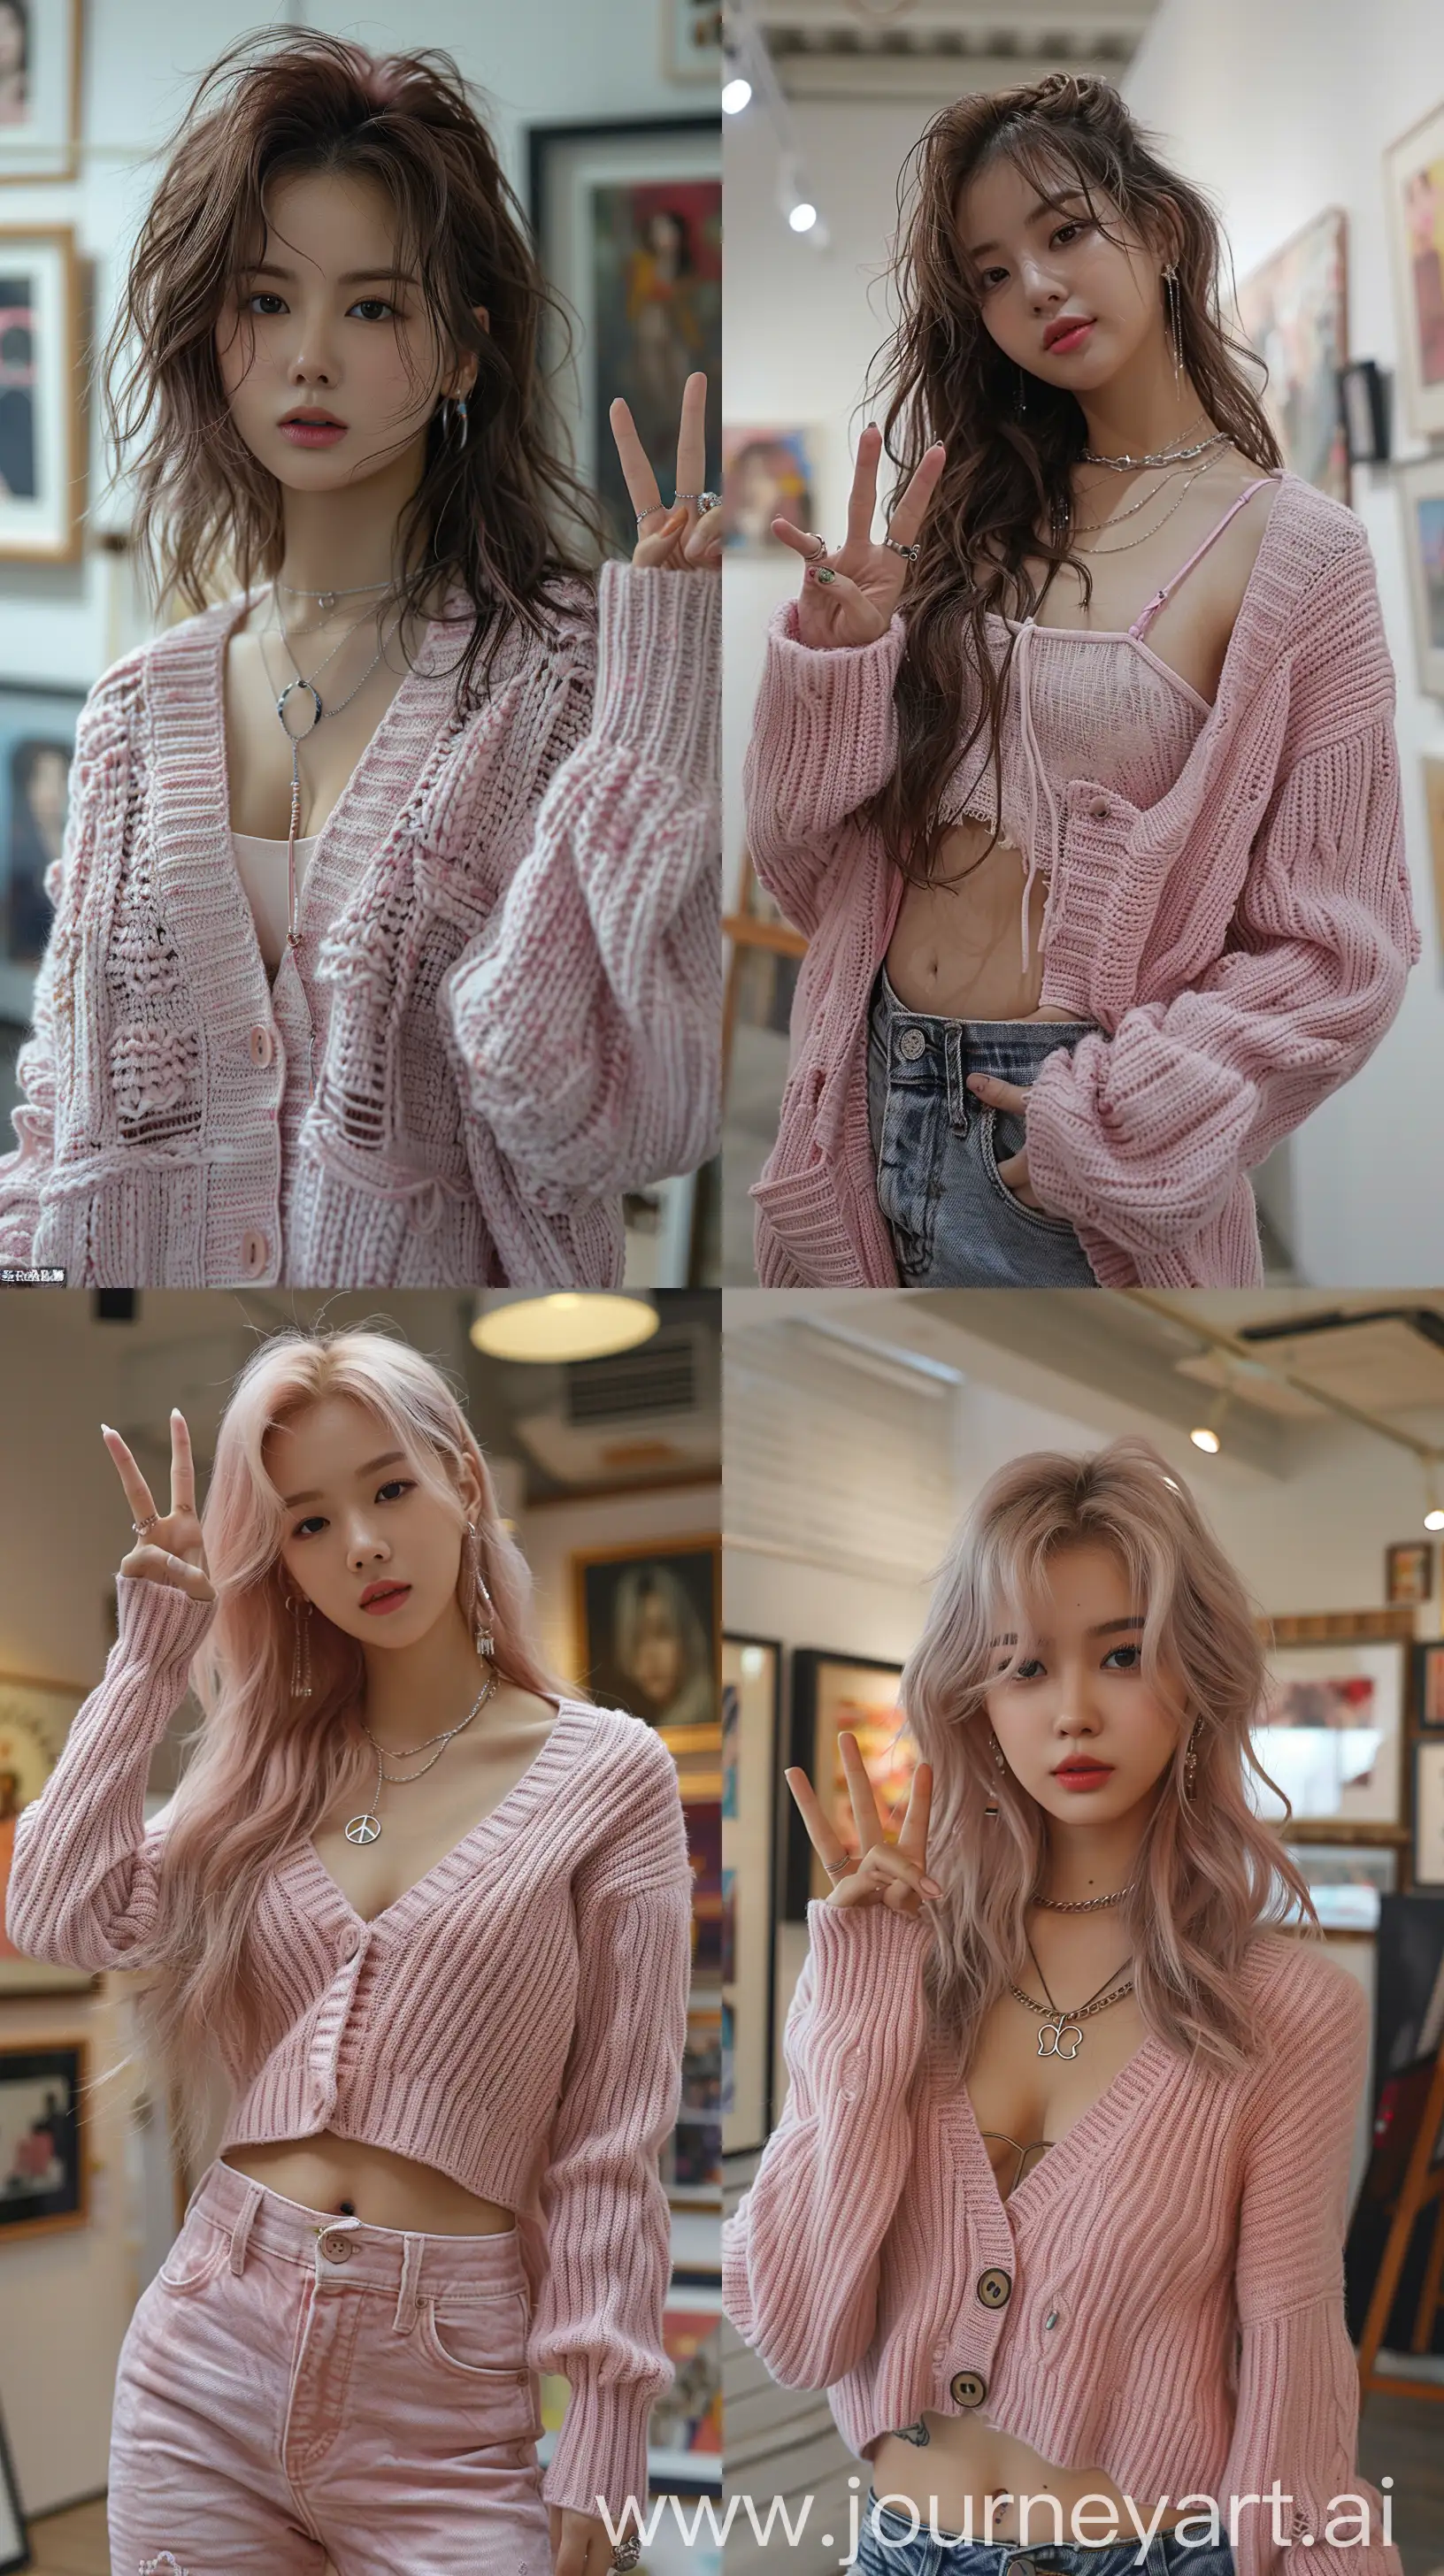 Blackpinks-Jennie-Flaunting-Wolfcut-Hairstyle-in-Soft-Pink-Cardigan-at-Art-Gallery